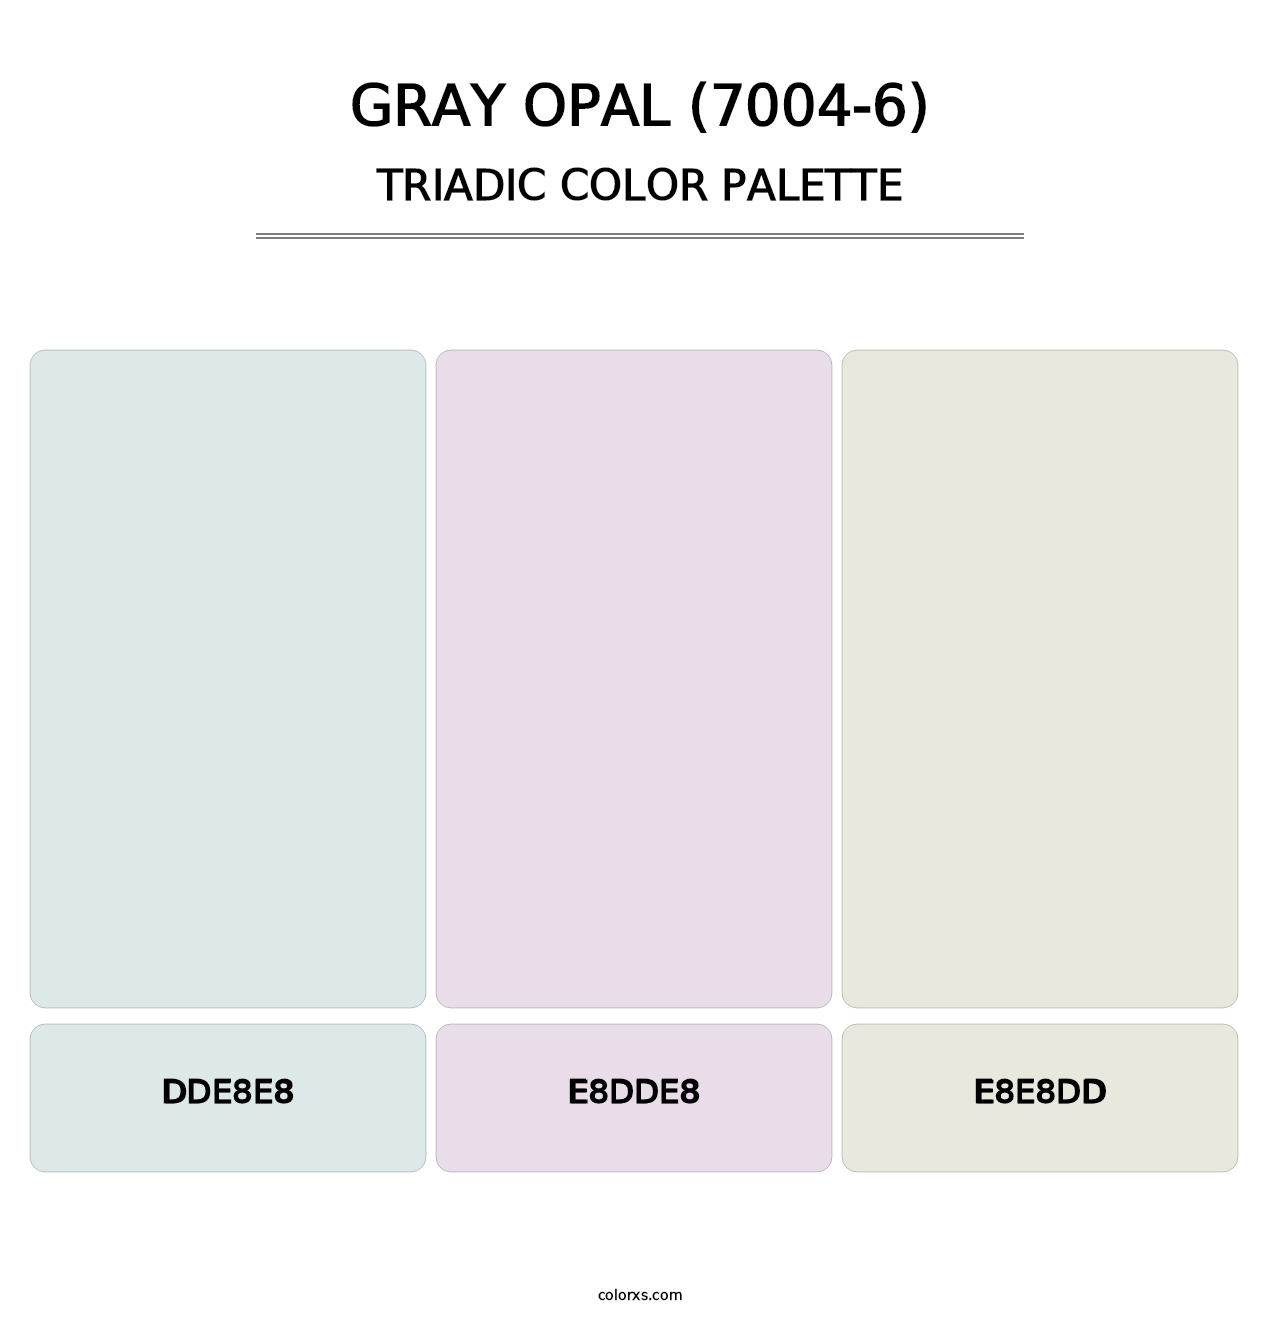 Gray Opal (7004-6) - Triadic Color Palette